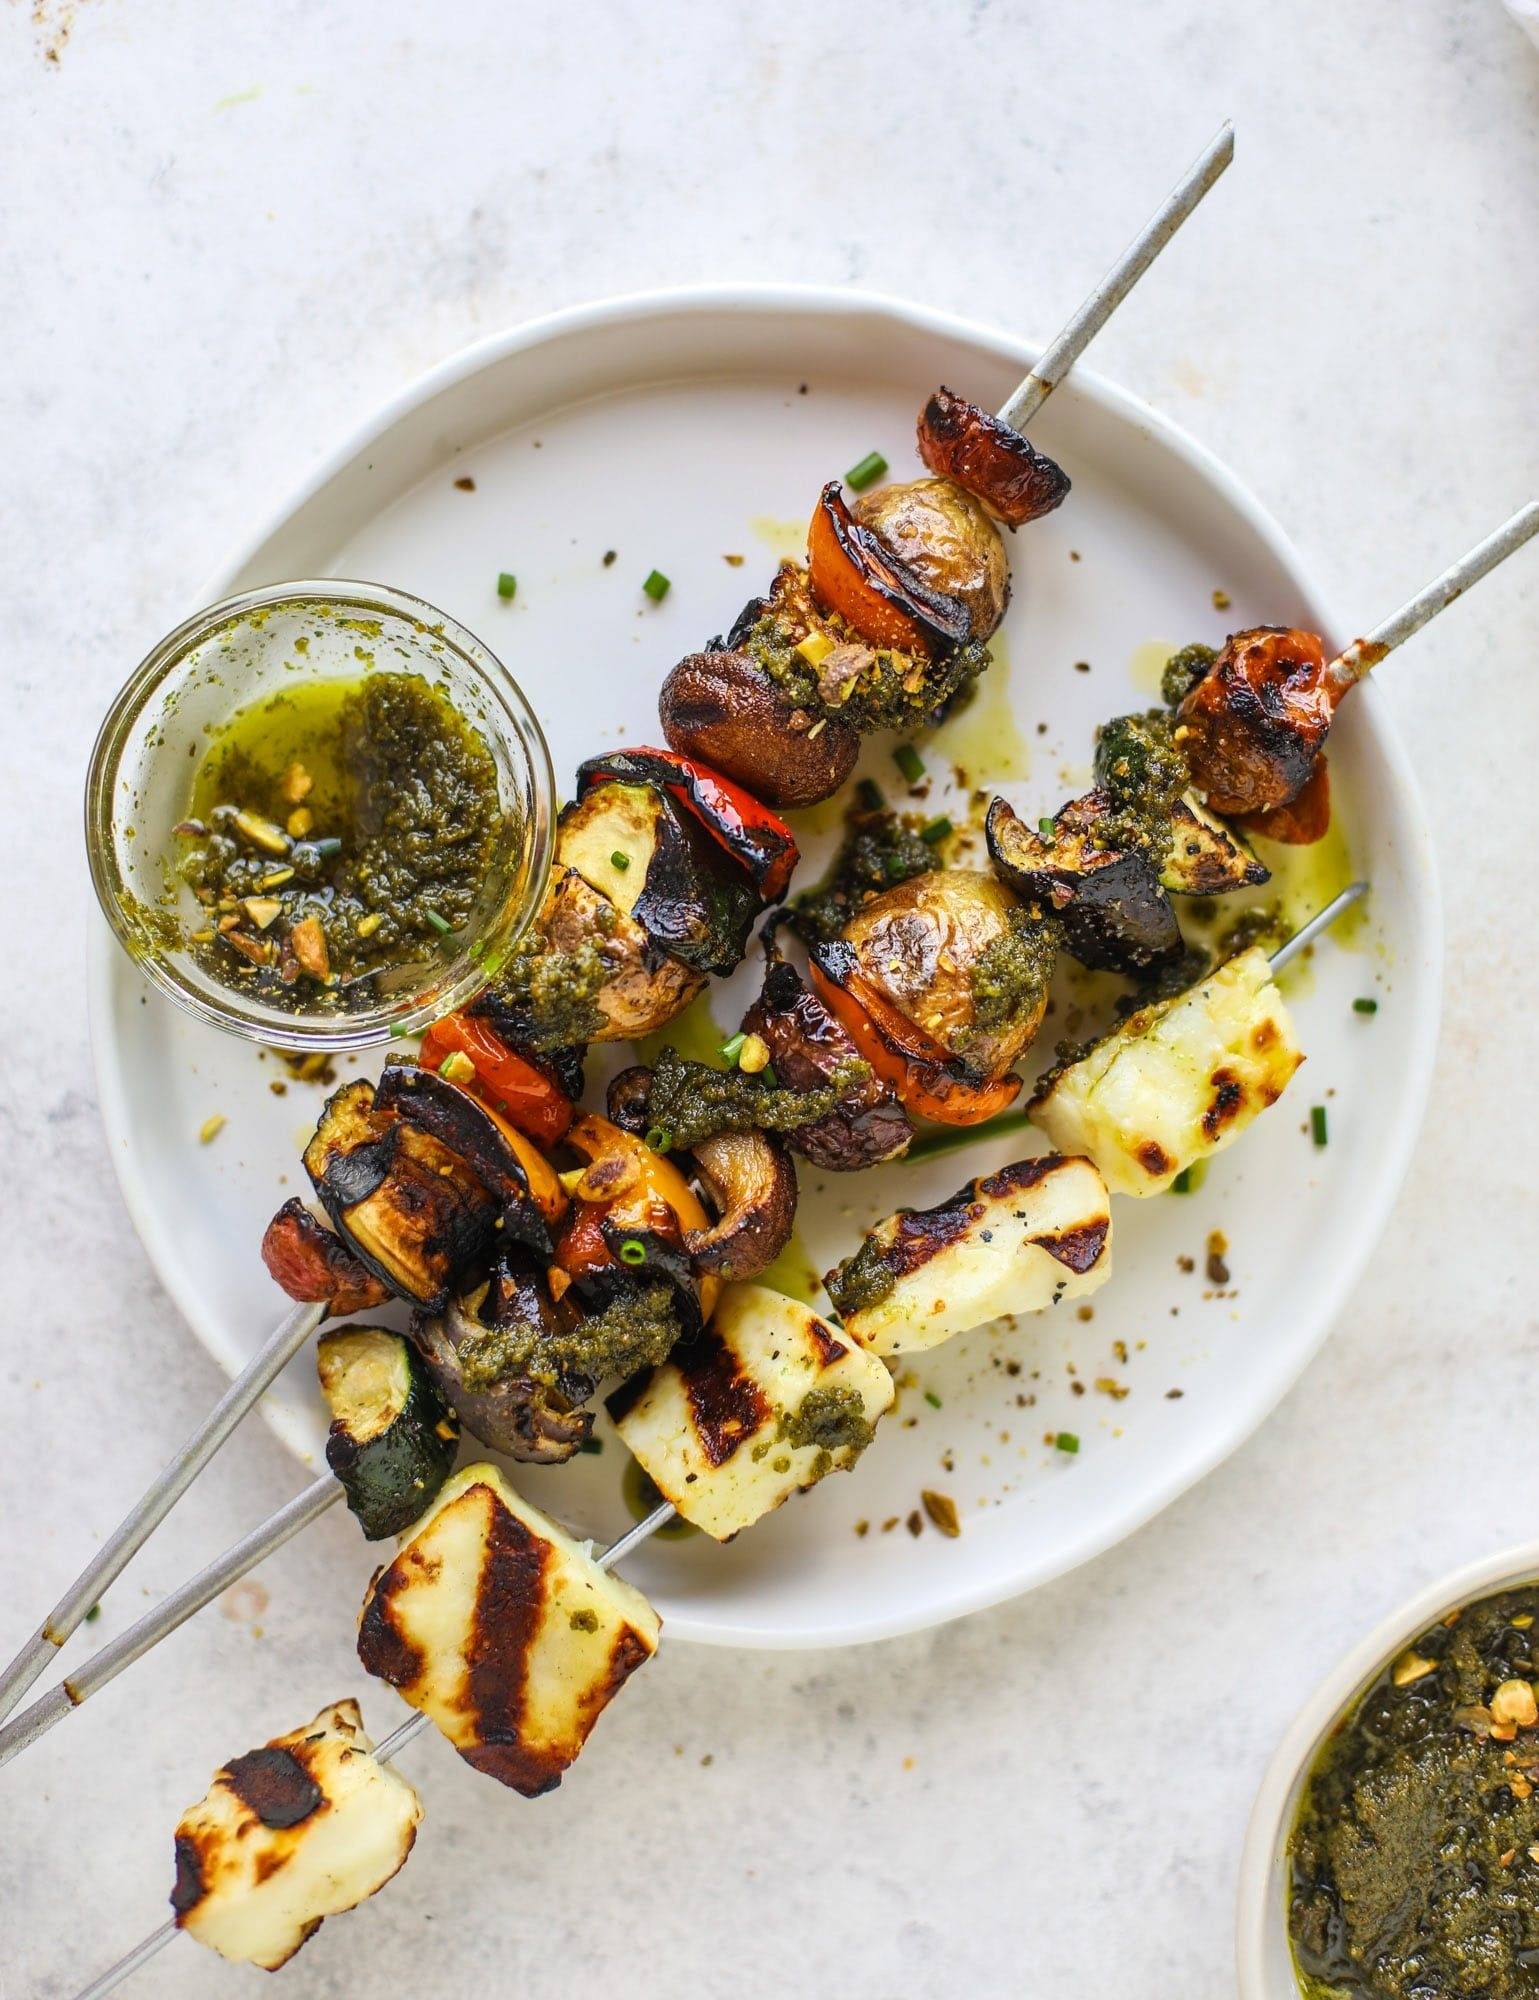 Grilled vegetable and halloumi skewers.